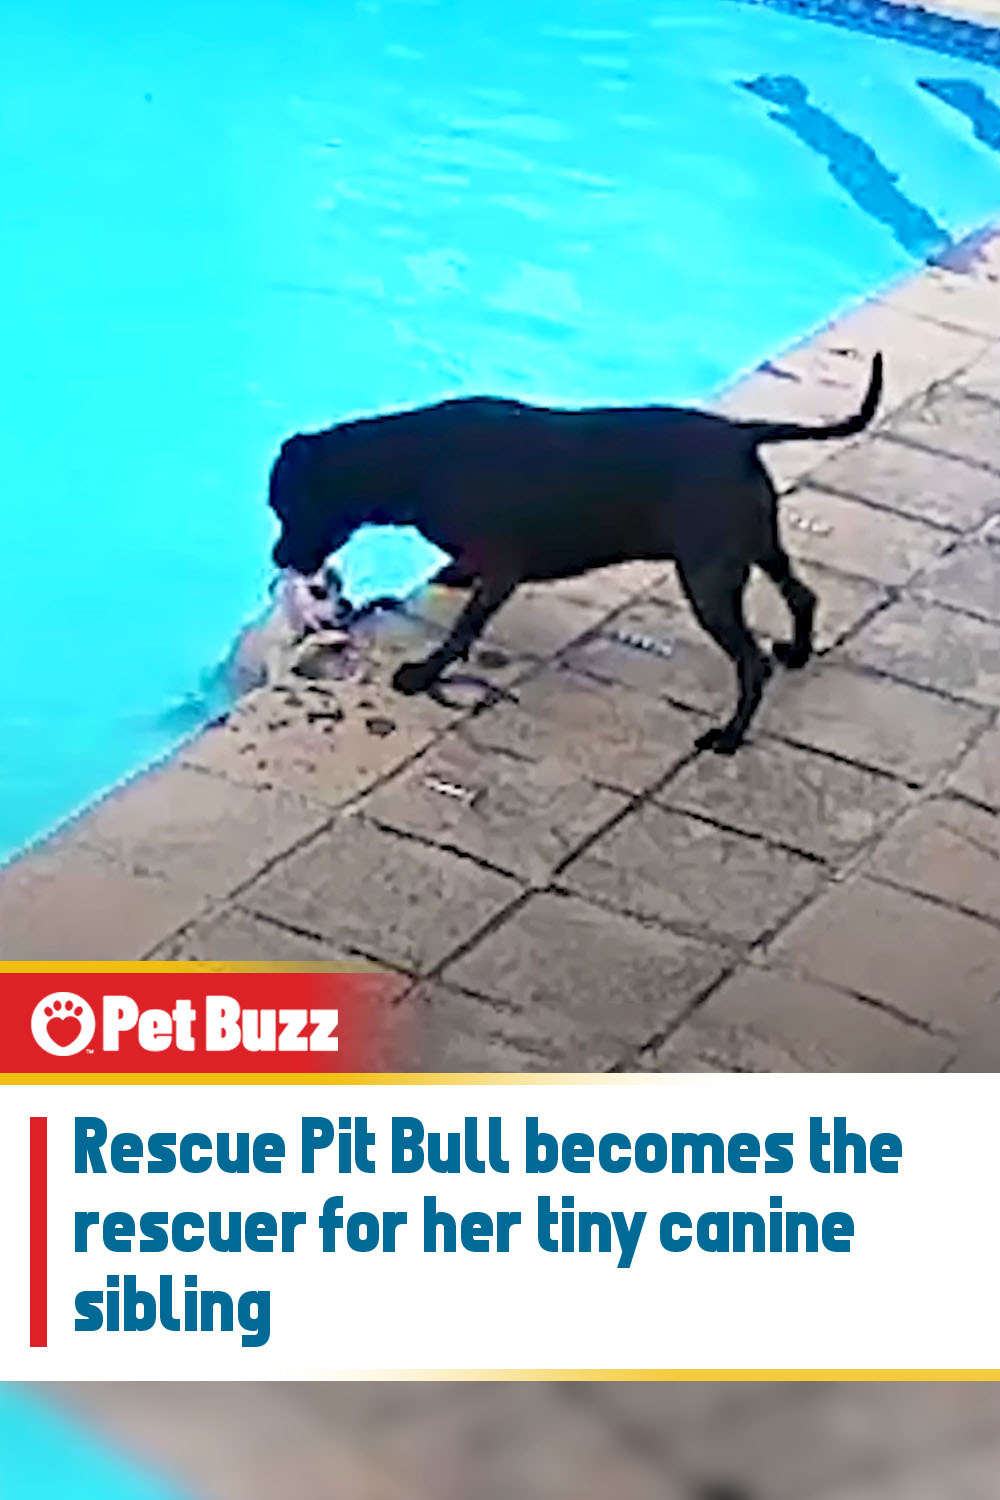 Rescue Pit Bull becomes the rescuer for her tiny canine sibling